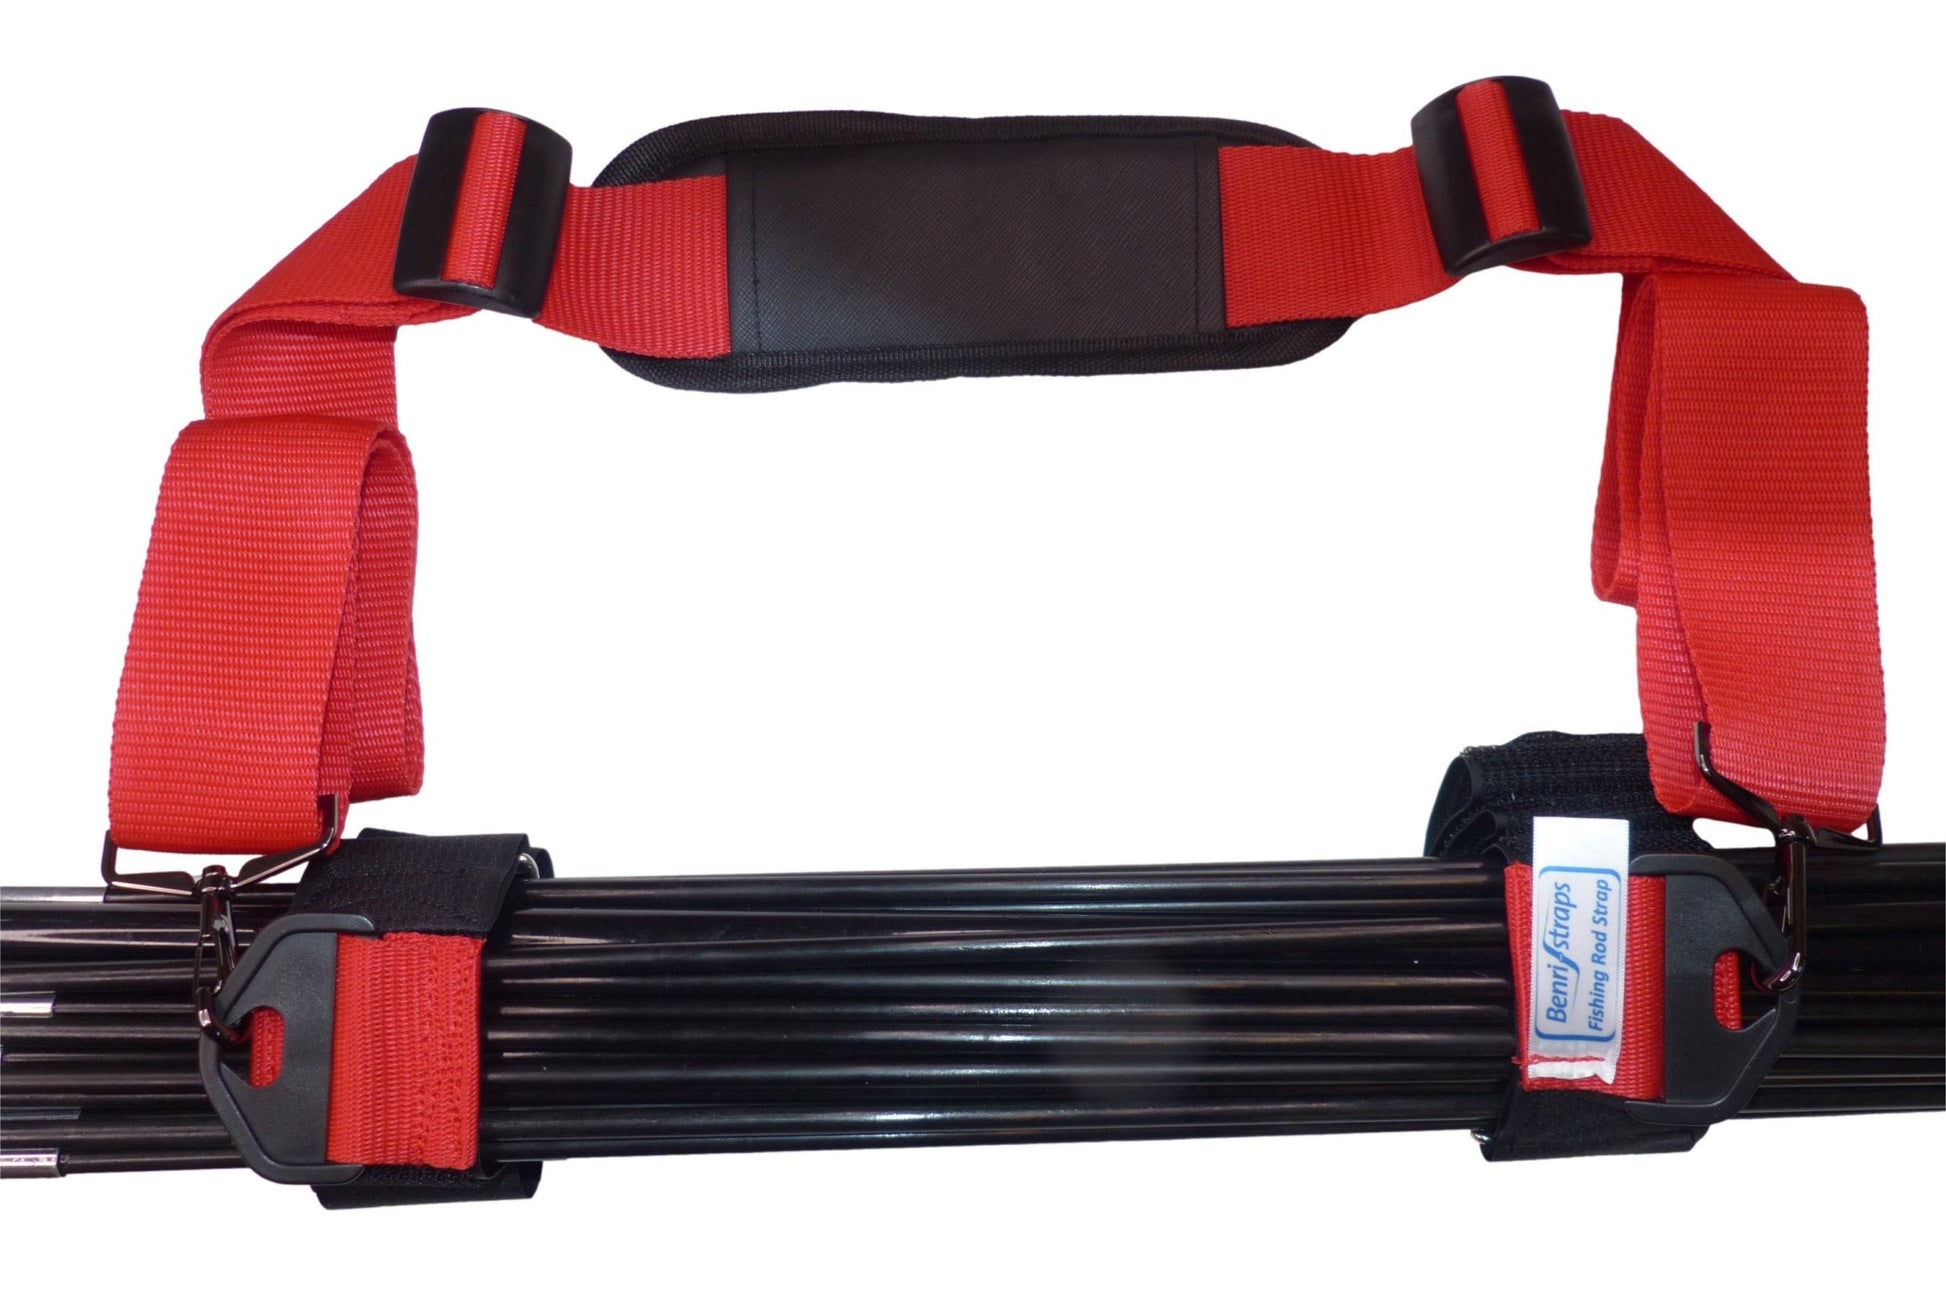 Benristraps Fishing Rod Carry Strap in red